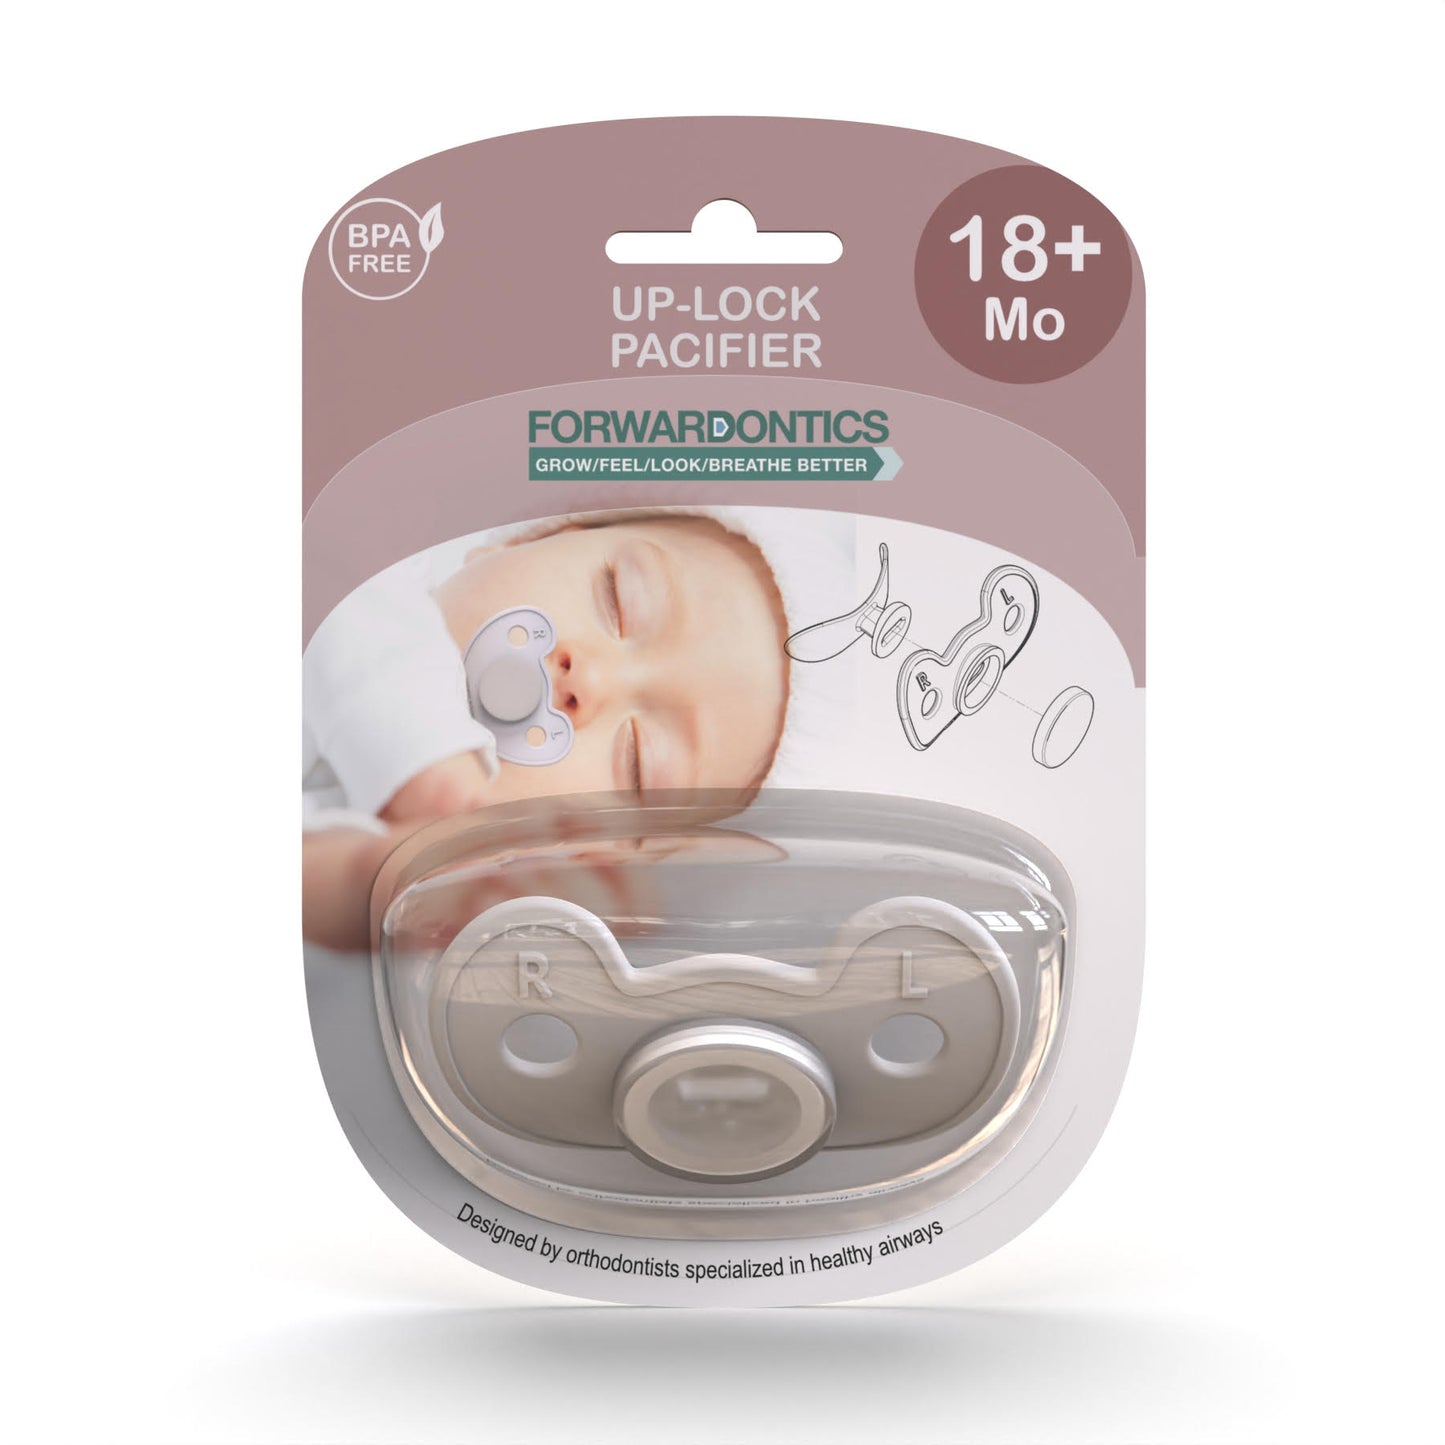 Up-Lock Pacifier